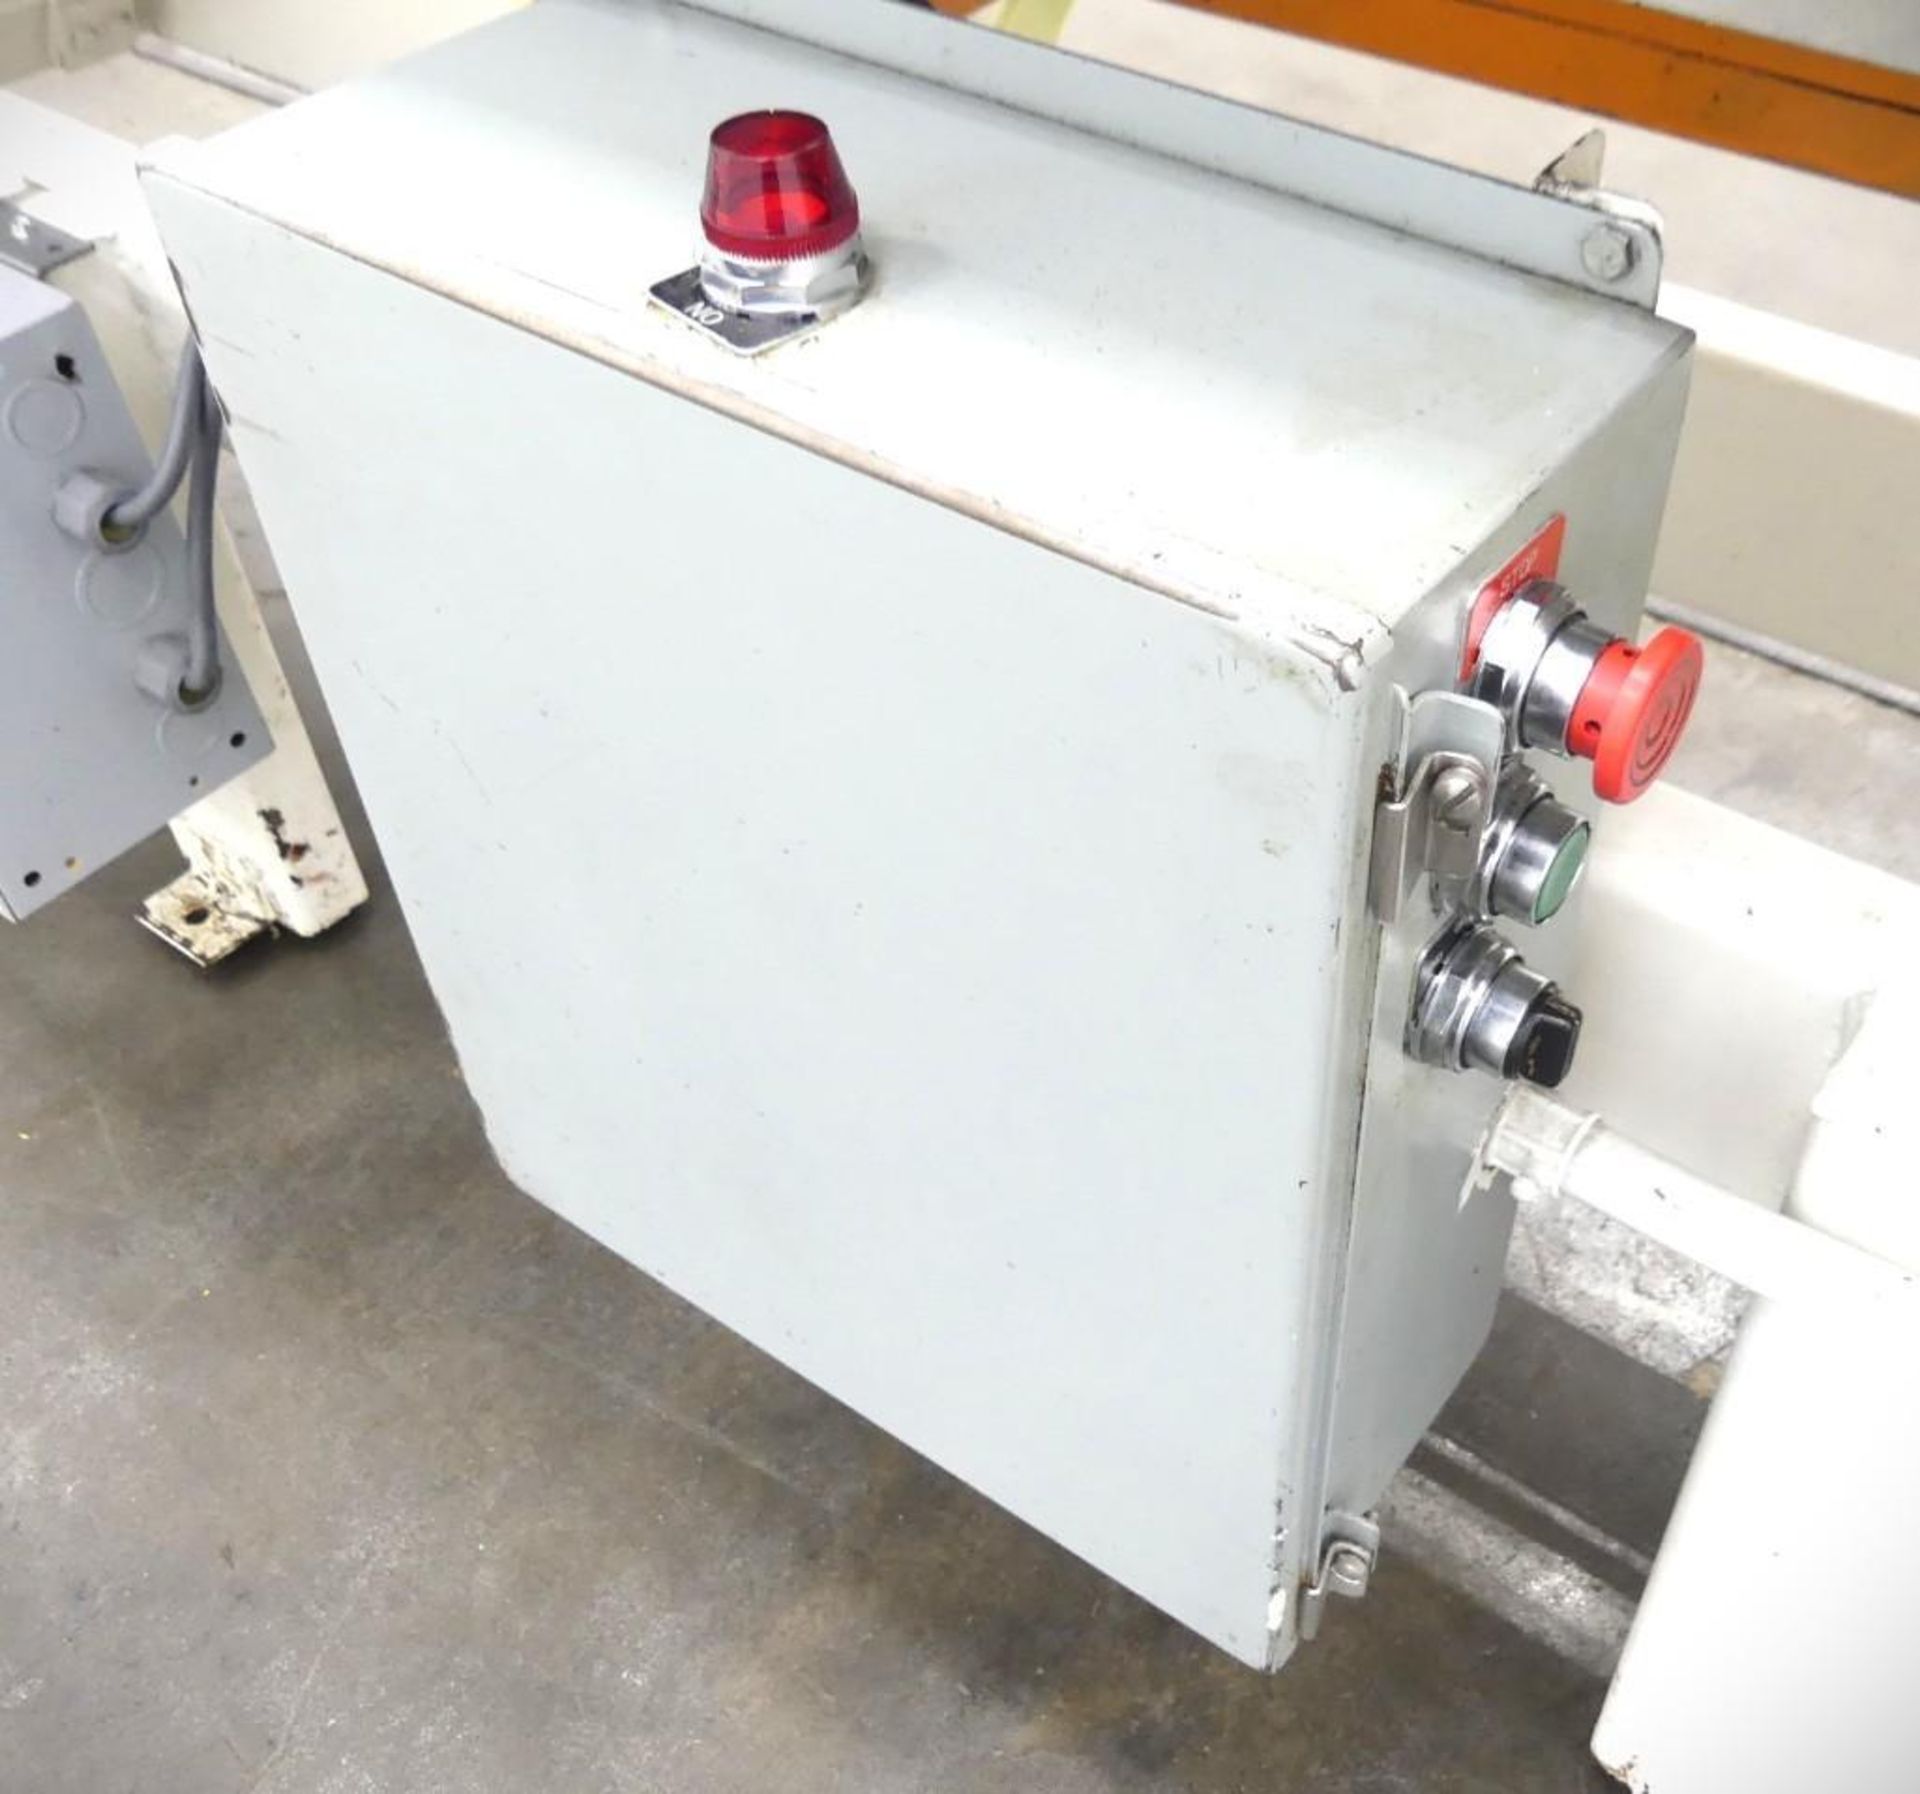 8'L x 24"W Linear Vibratory Feeder - Image 16 of 23